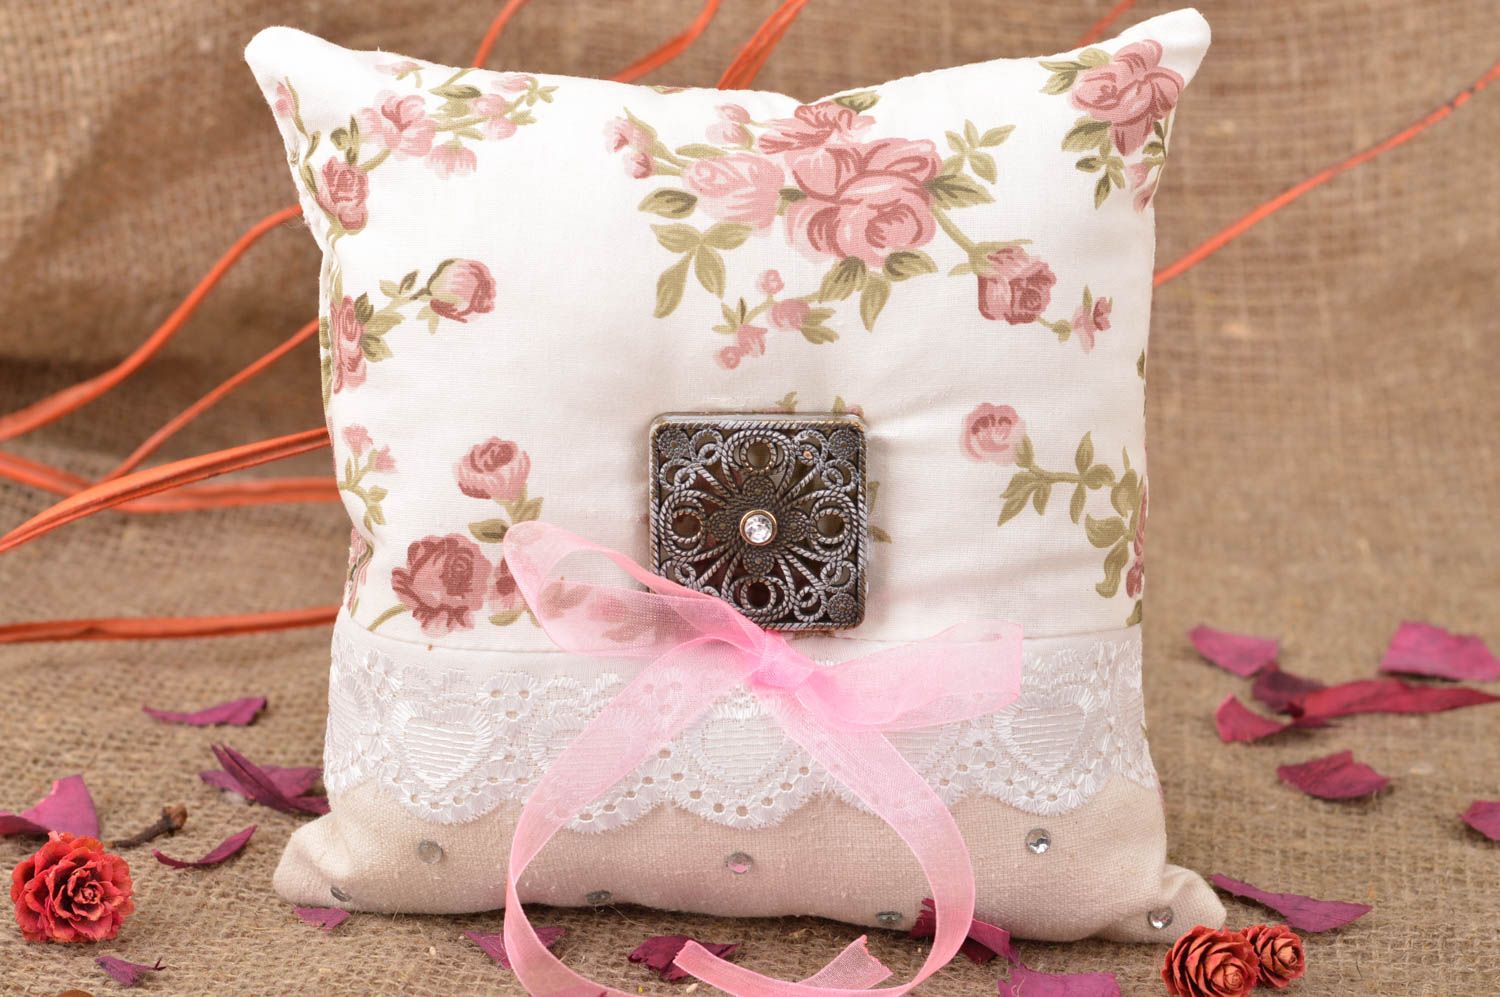 Handmade designer ring bearer pillow sewn of floral cotton fabric with lace photo 1